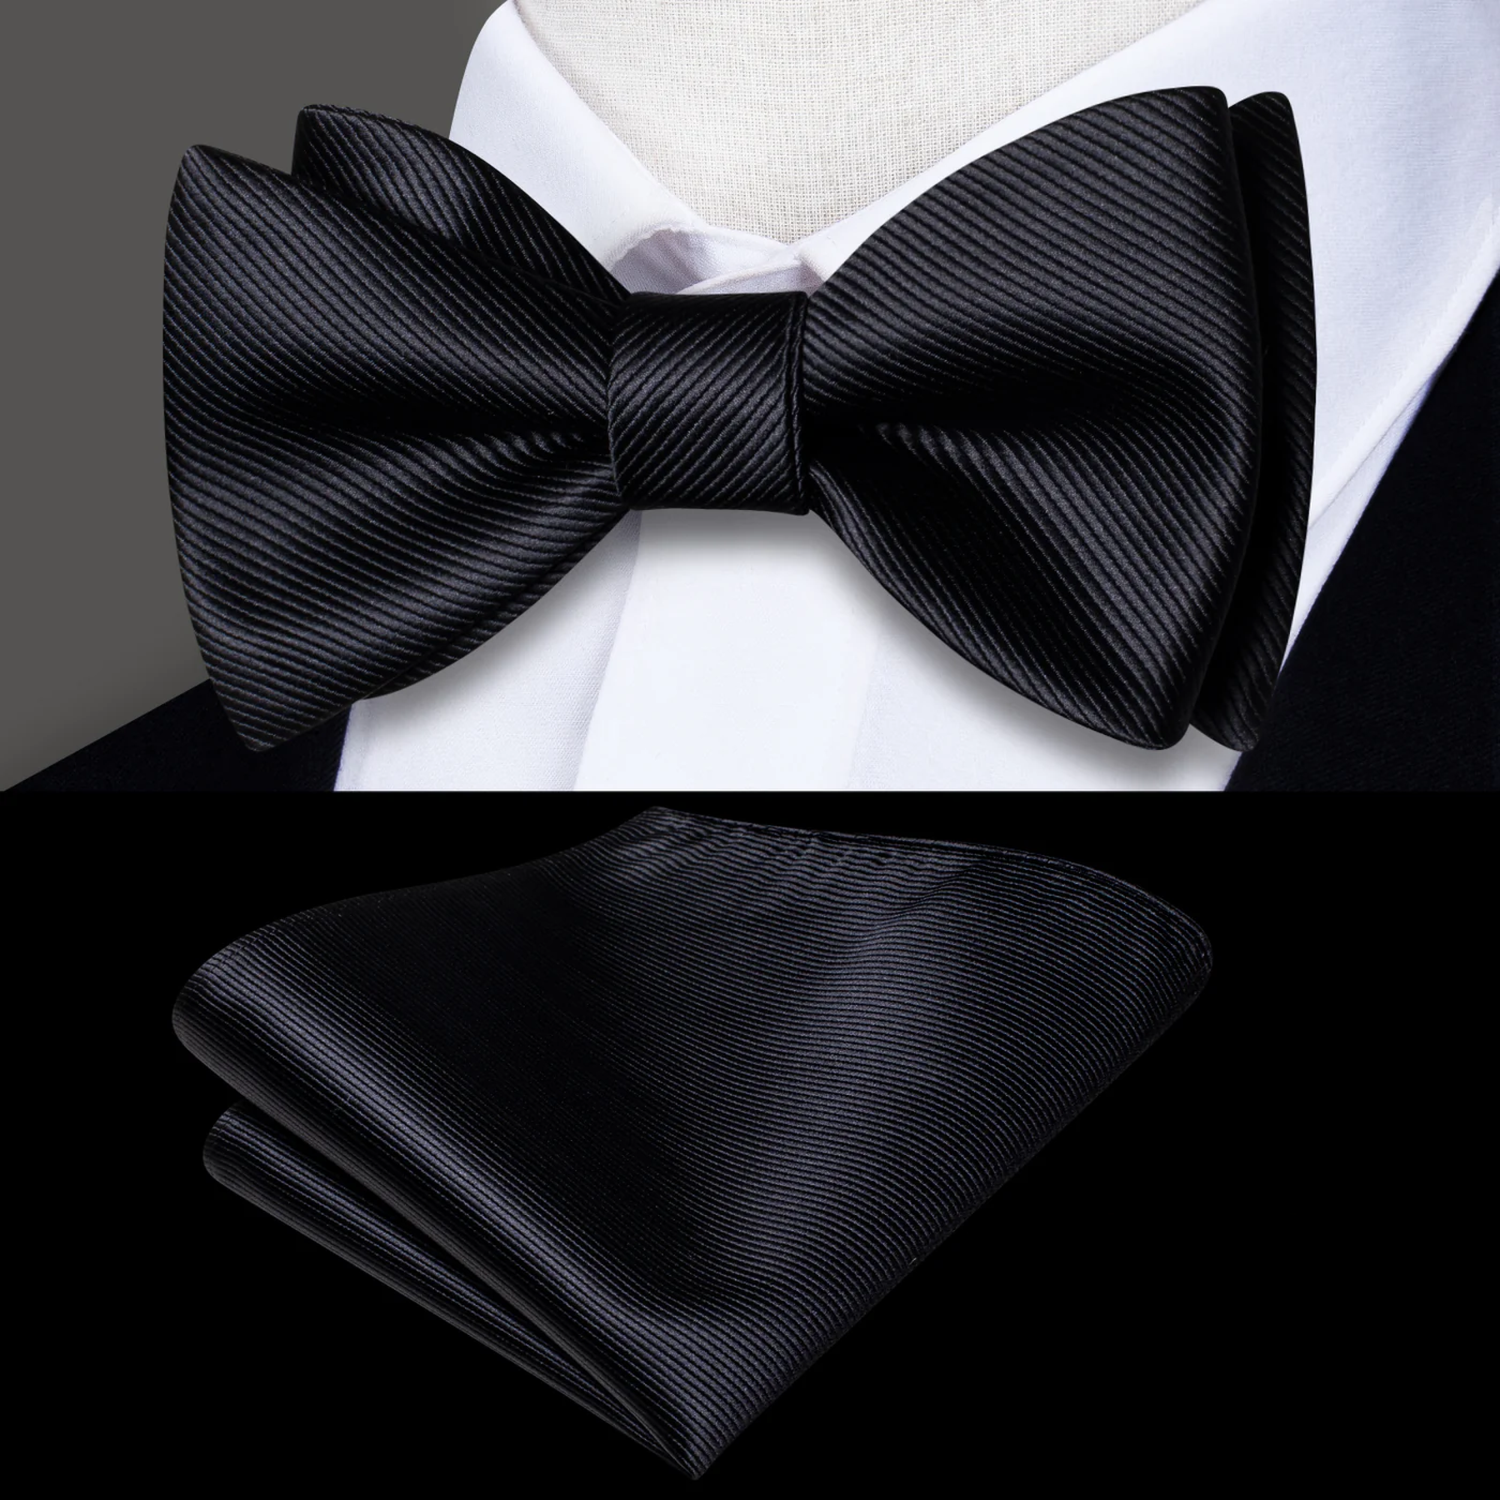 Main View: A Black Solid Pattern Silk Self Tie Bow Tie, Matching Pocket Square On Suit